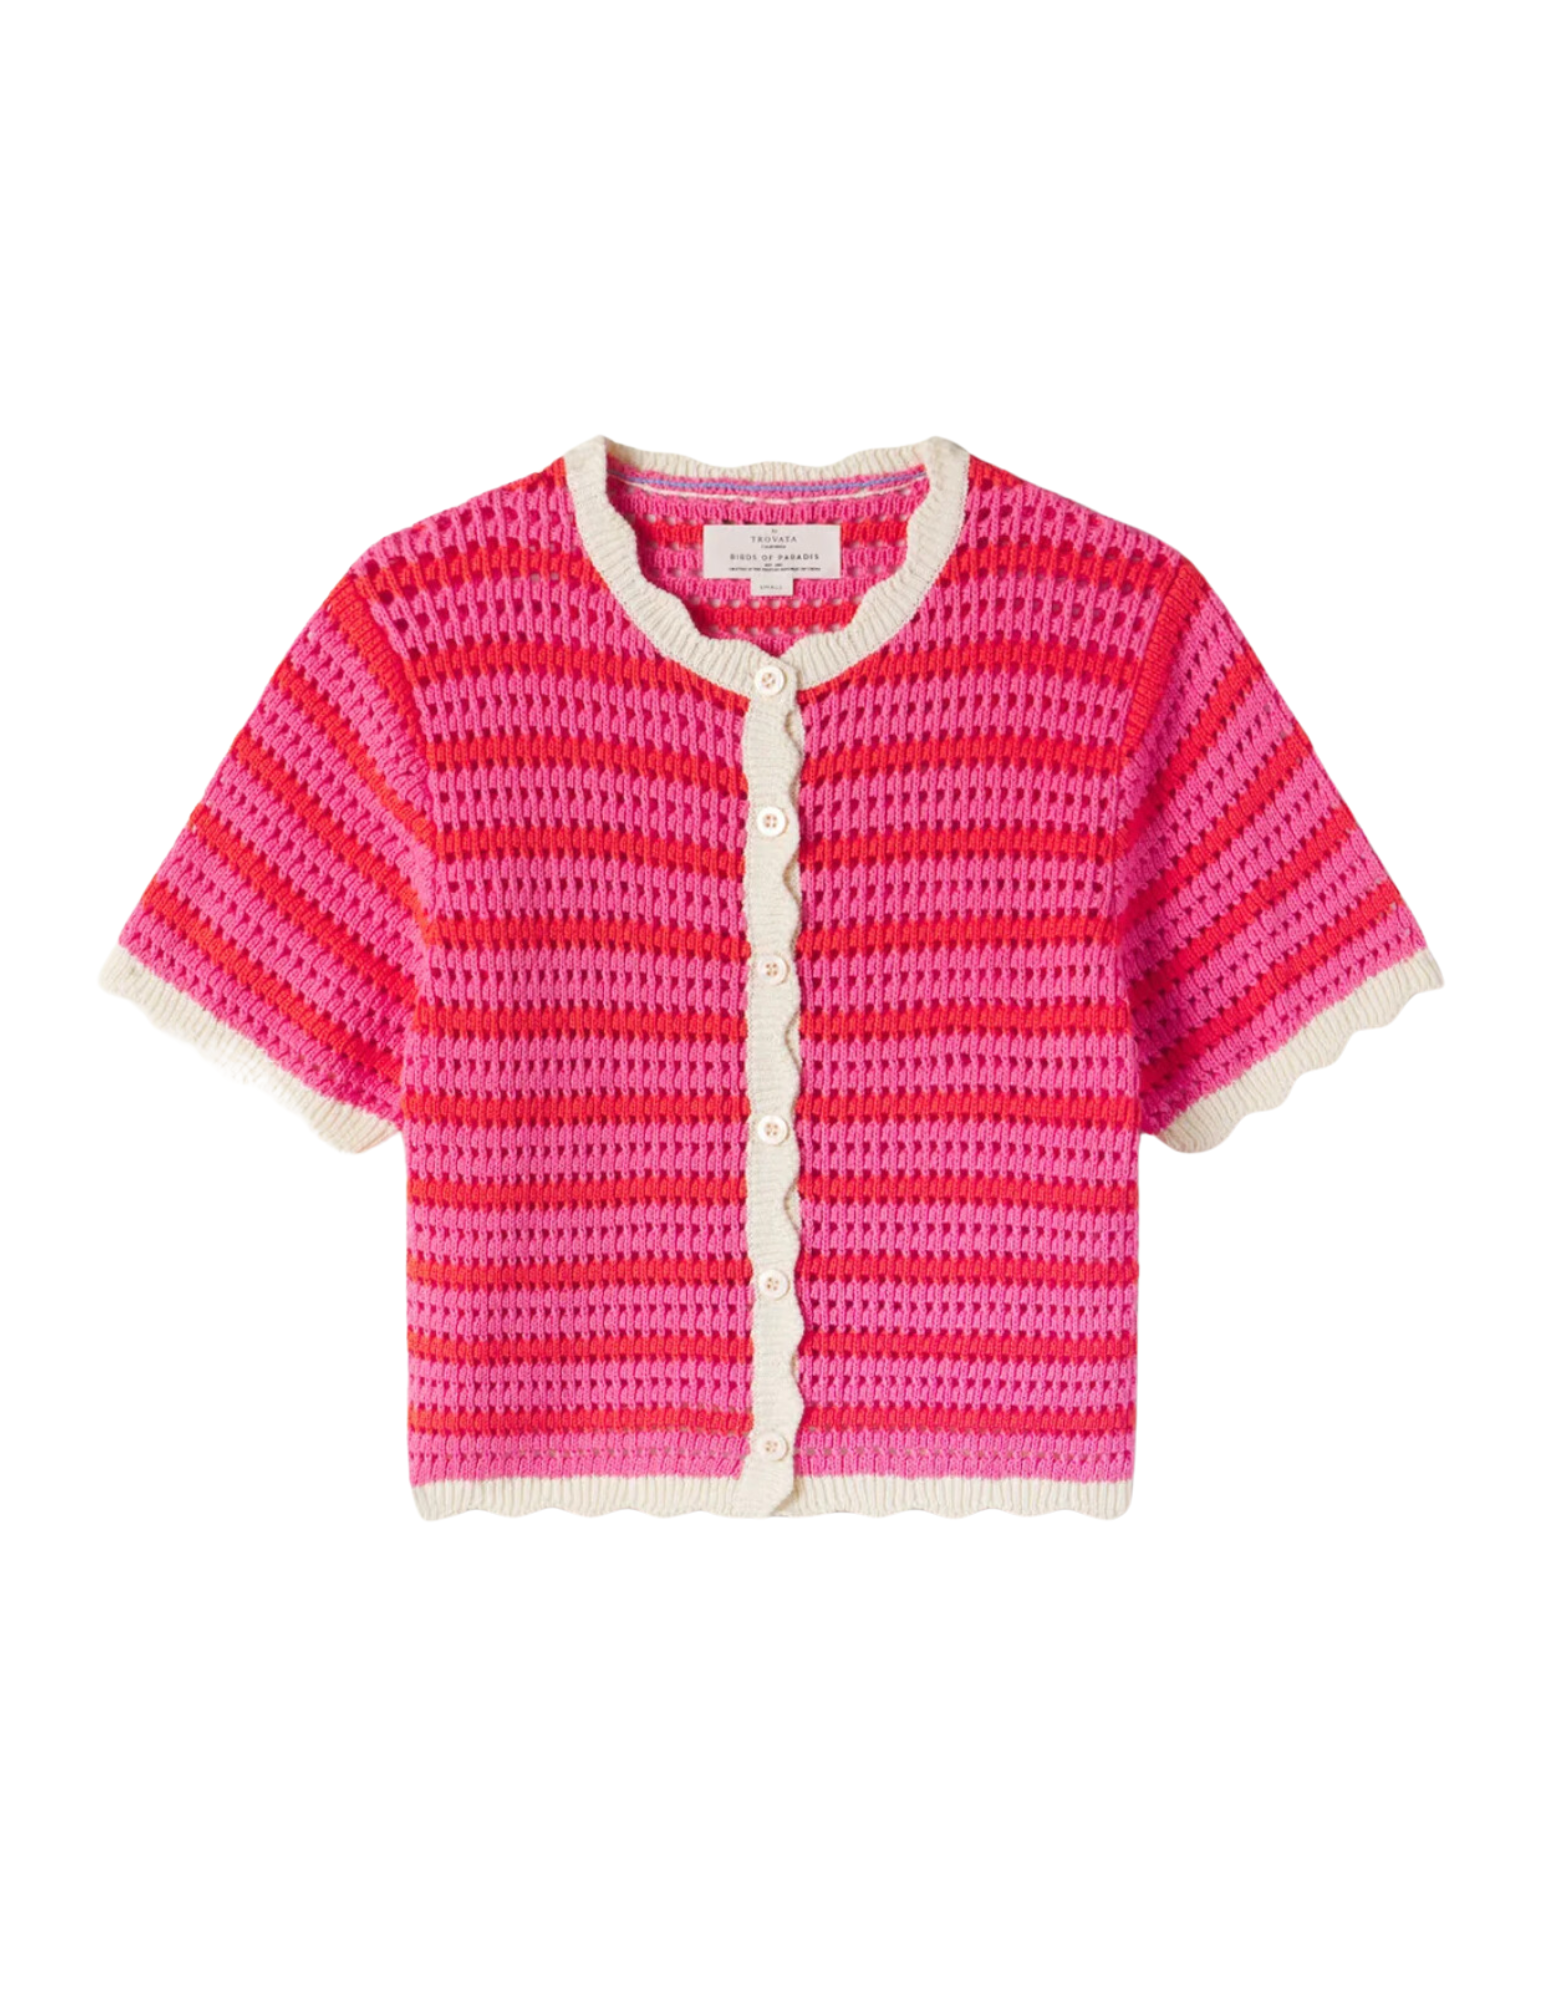 Lou S/S Knit Cardigan - Pink/Red